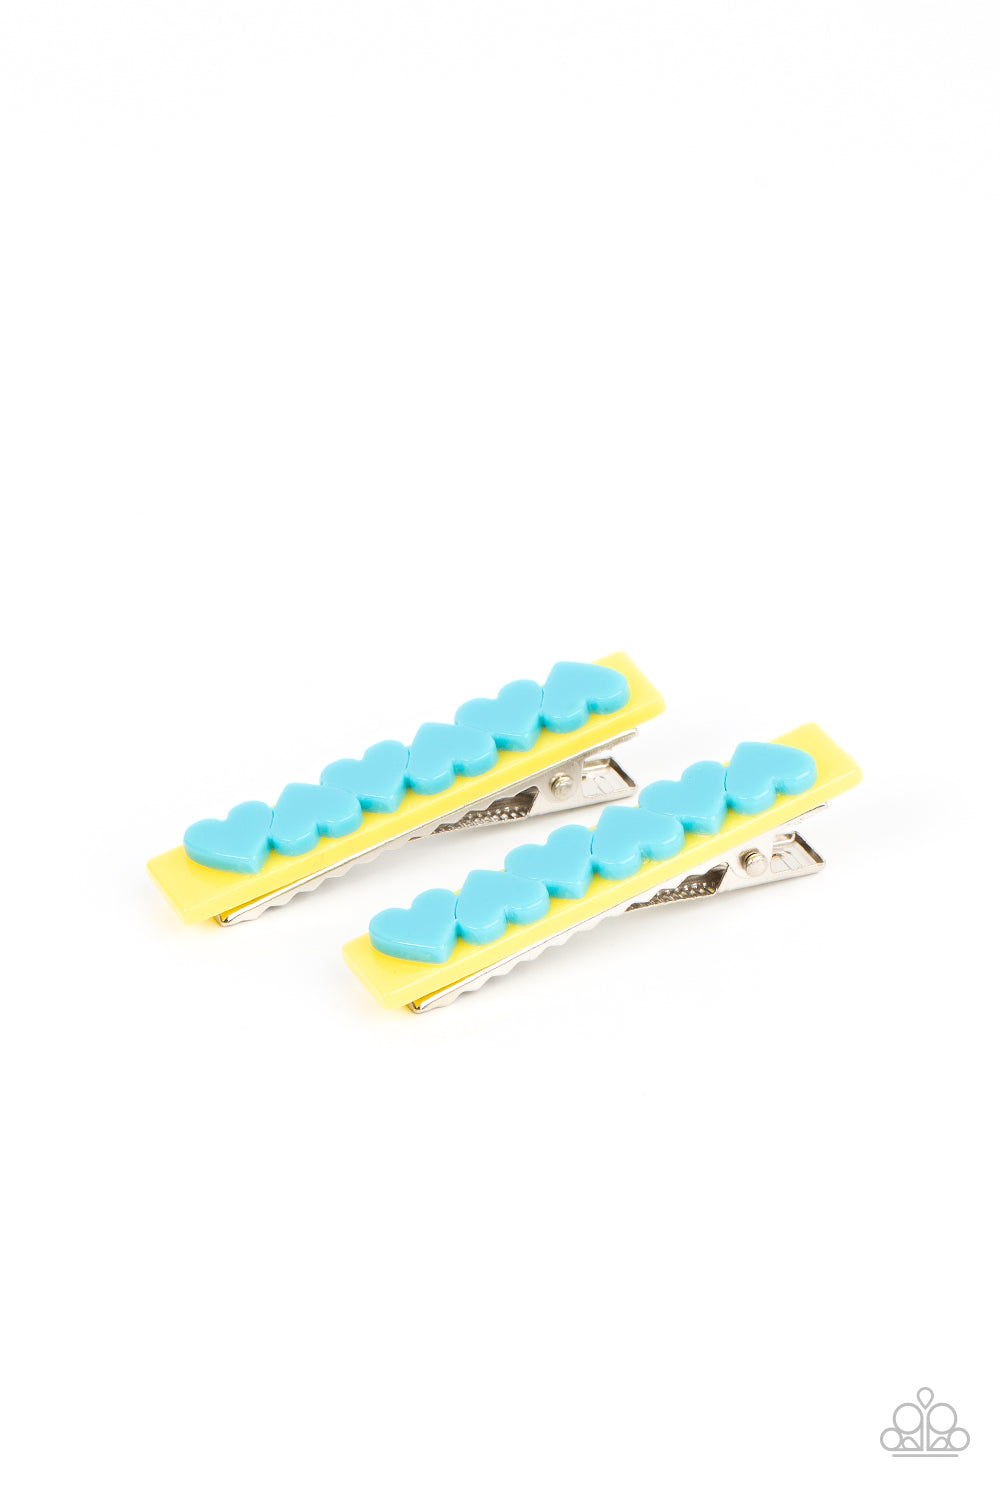 Cutely Cupid - Multi Blue Hearts & Yellow Rectangular Frame Paparazzi Set of 2 Hair Clips